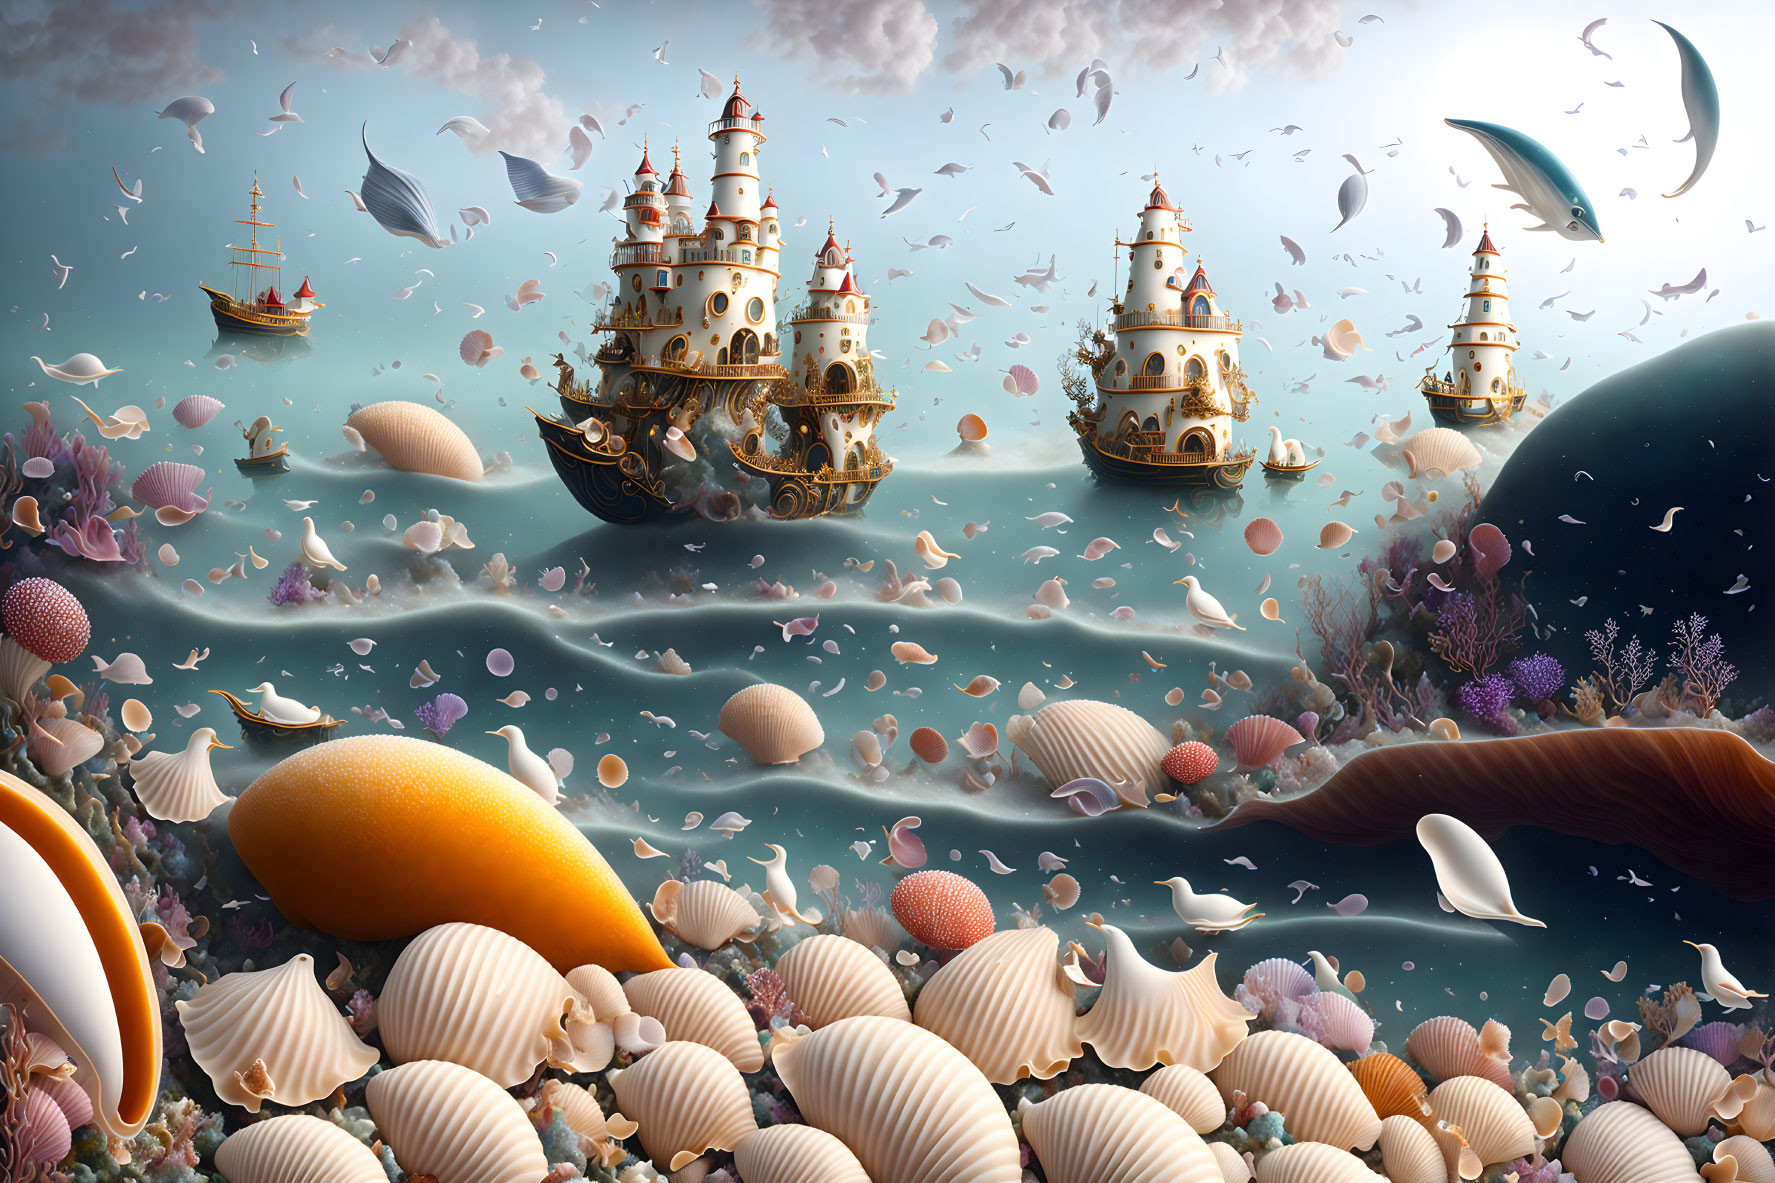 Fantastical seascape with floating castles, sea life, moons, and surreal sky-sea